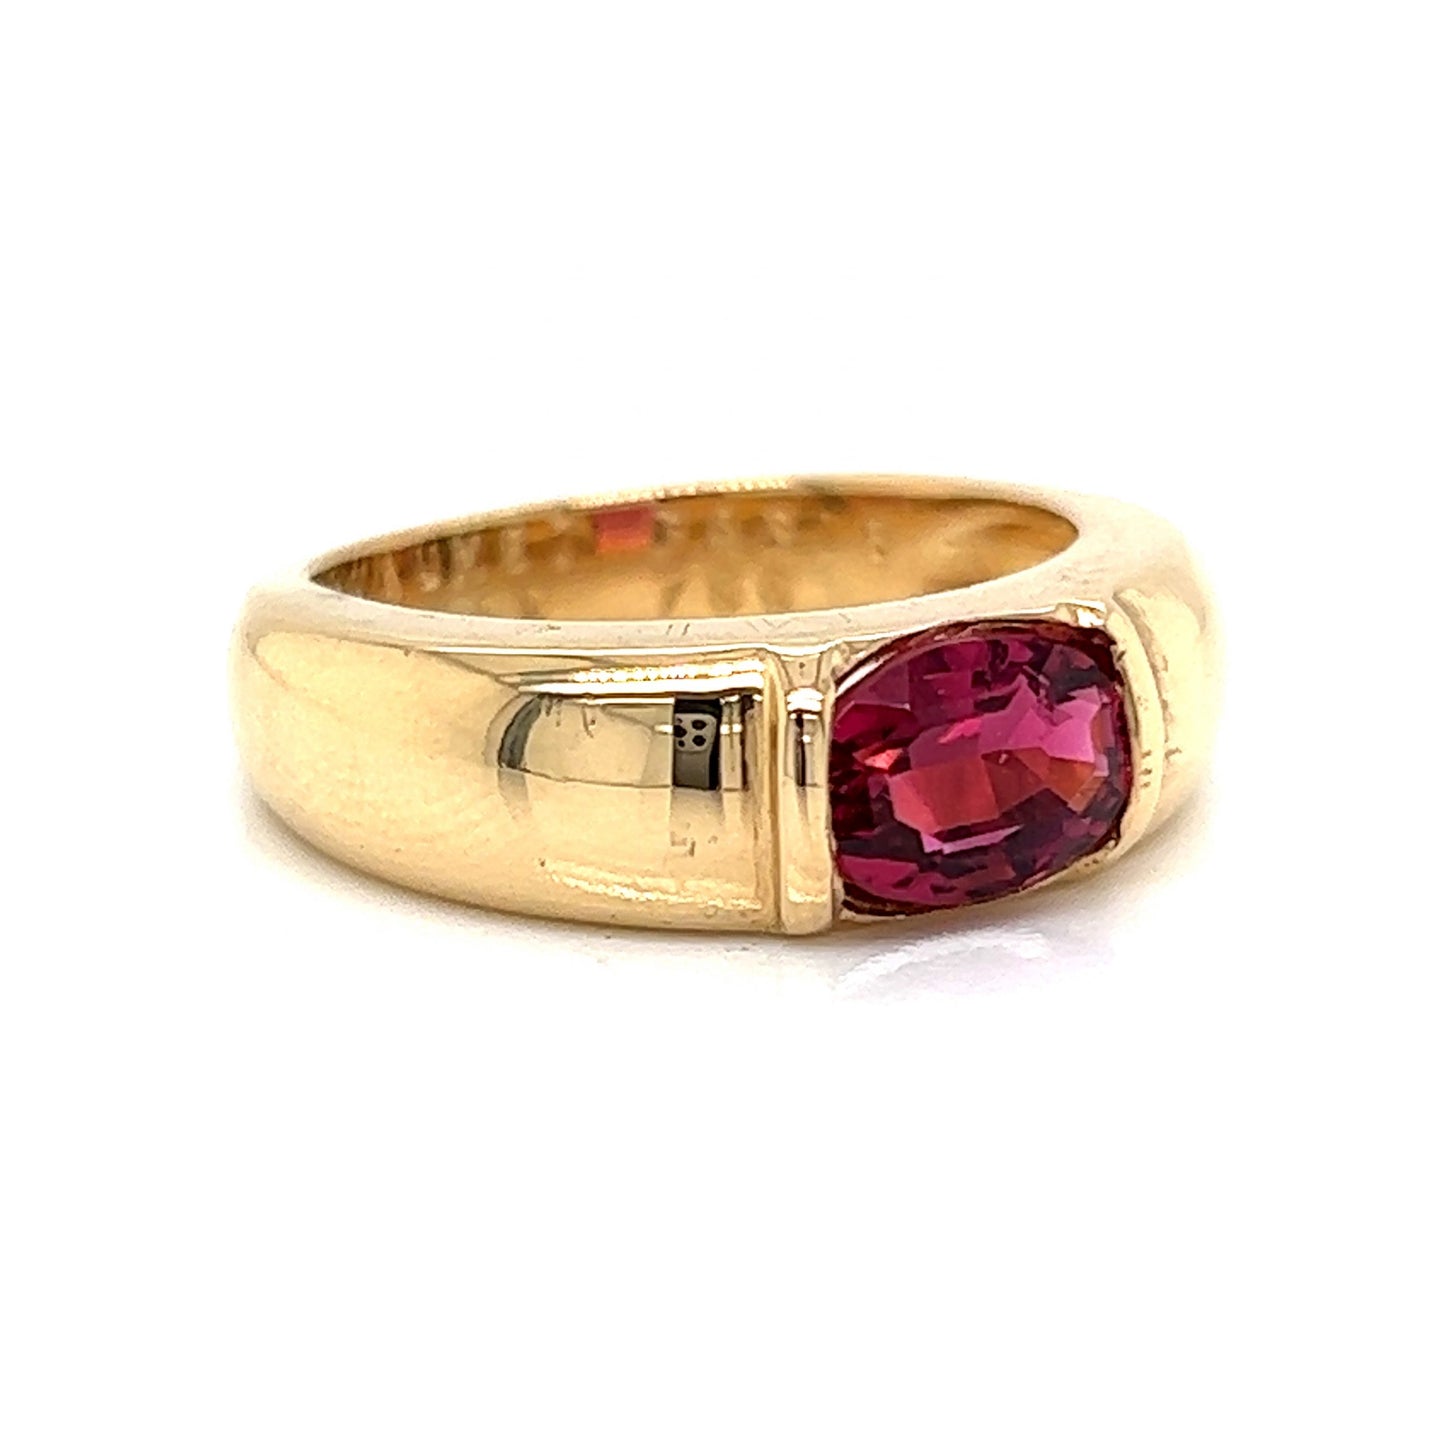 Chaumet Oval Cut Pink Tourmaline Ring in 18k Yellow Gold